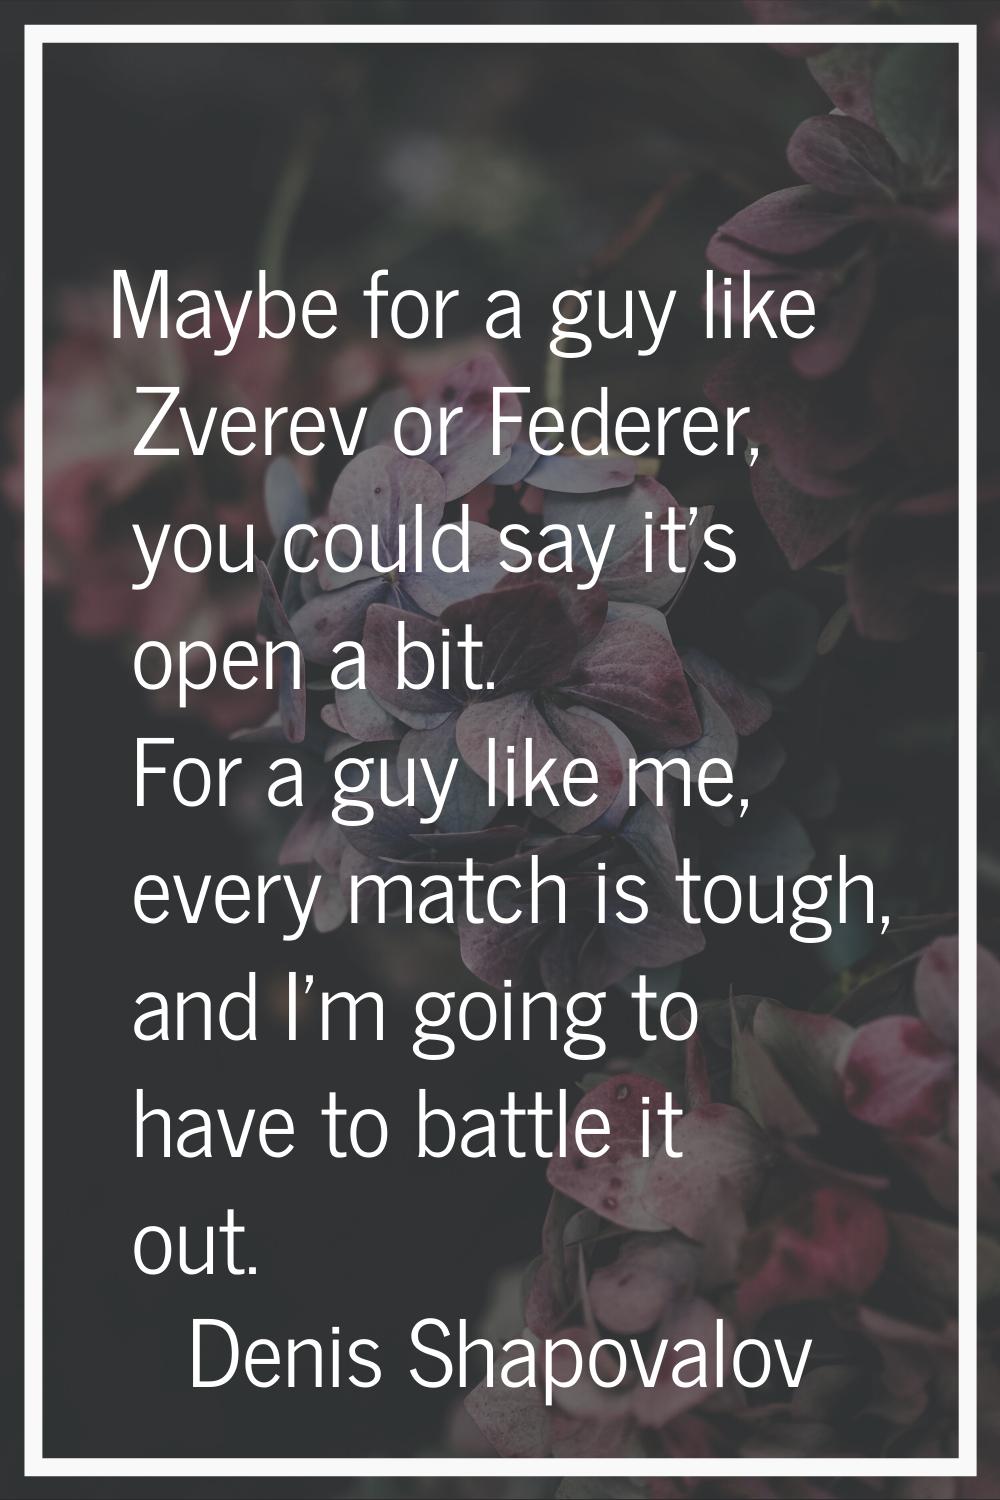 Maybe for a guy like Zverev or Federer, you could say it's open a bit. For a guy like me, every mat